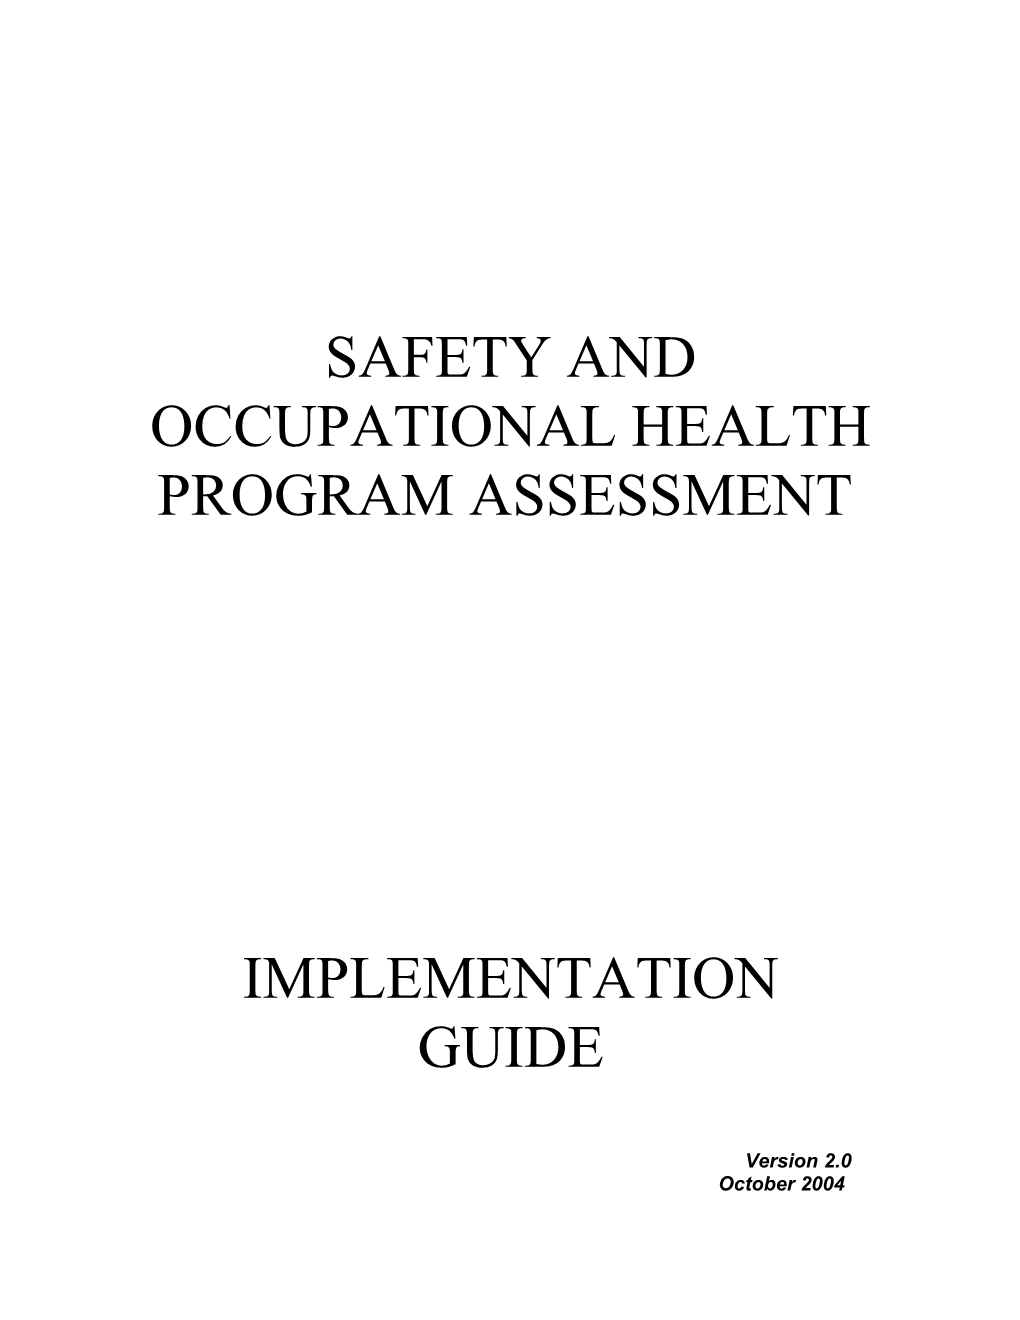 Safety and Occupational Health Program Assessment Implementation Guide